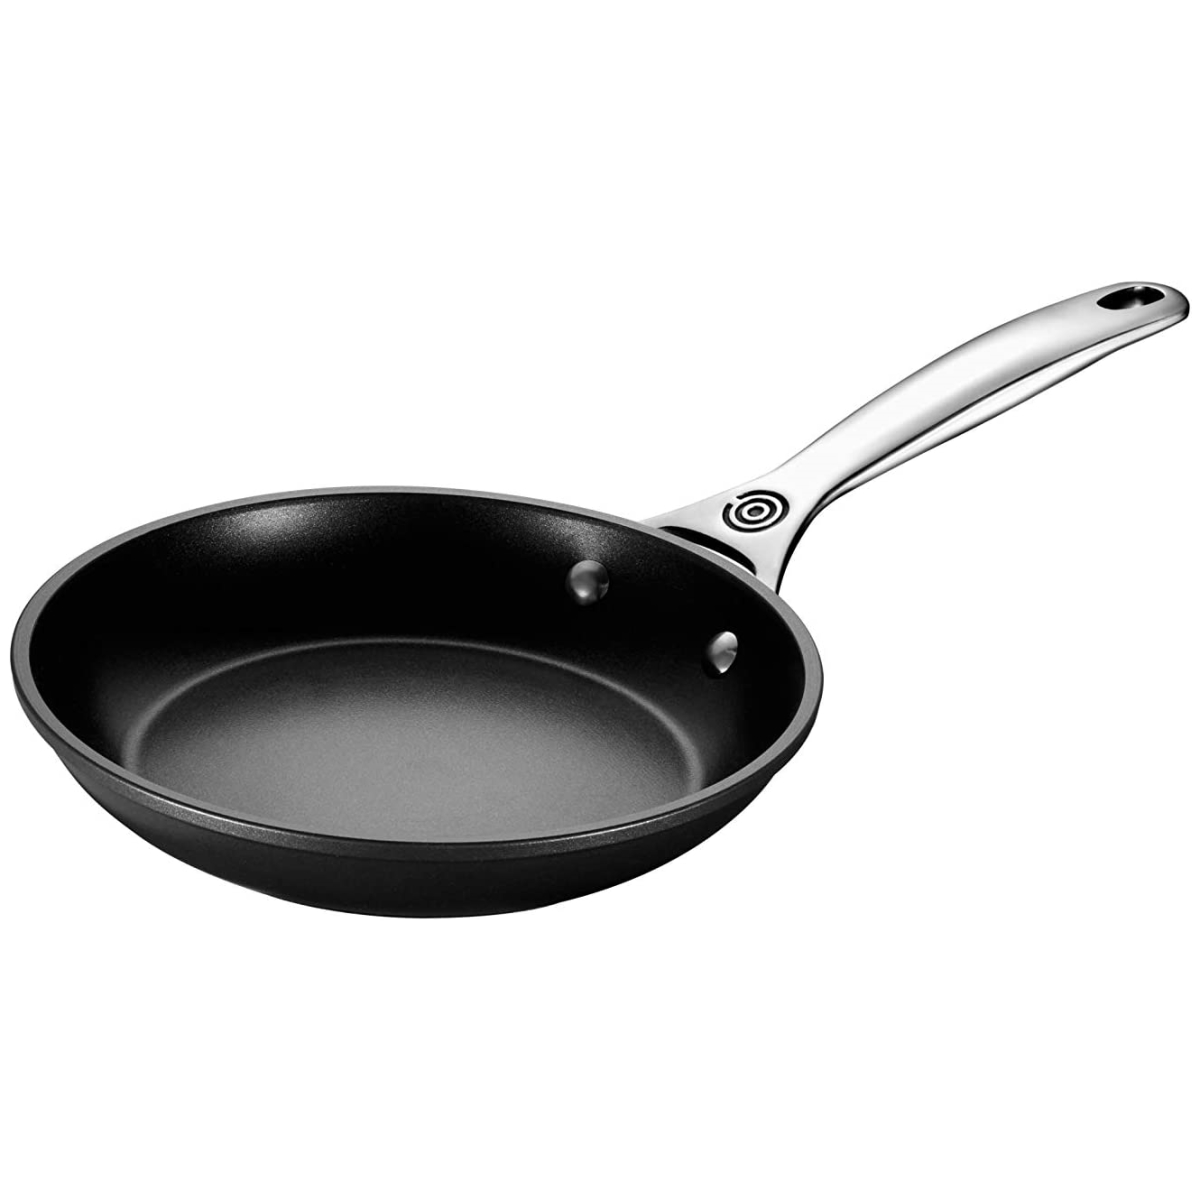 OXO Good Grips Non-stick Pro Dishwasher Safe 8 Open Frypan for sale online